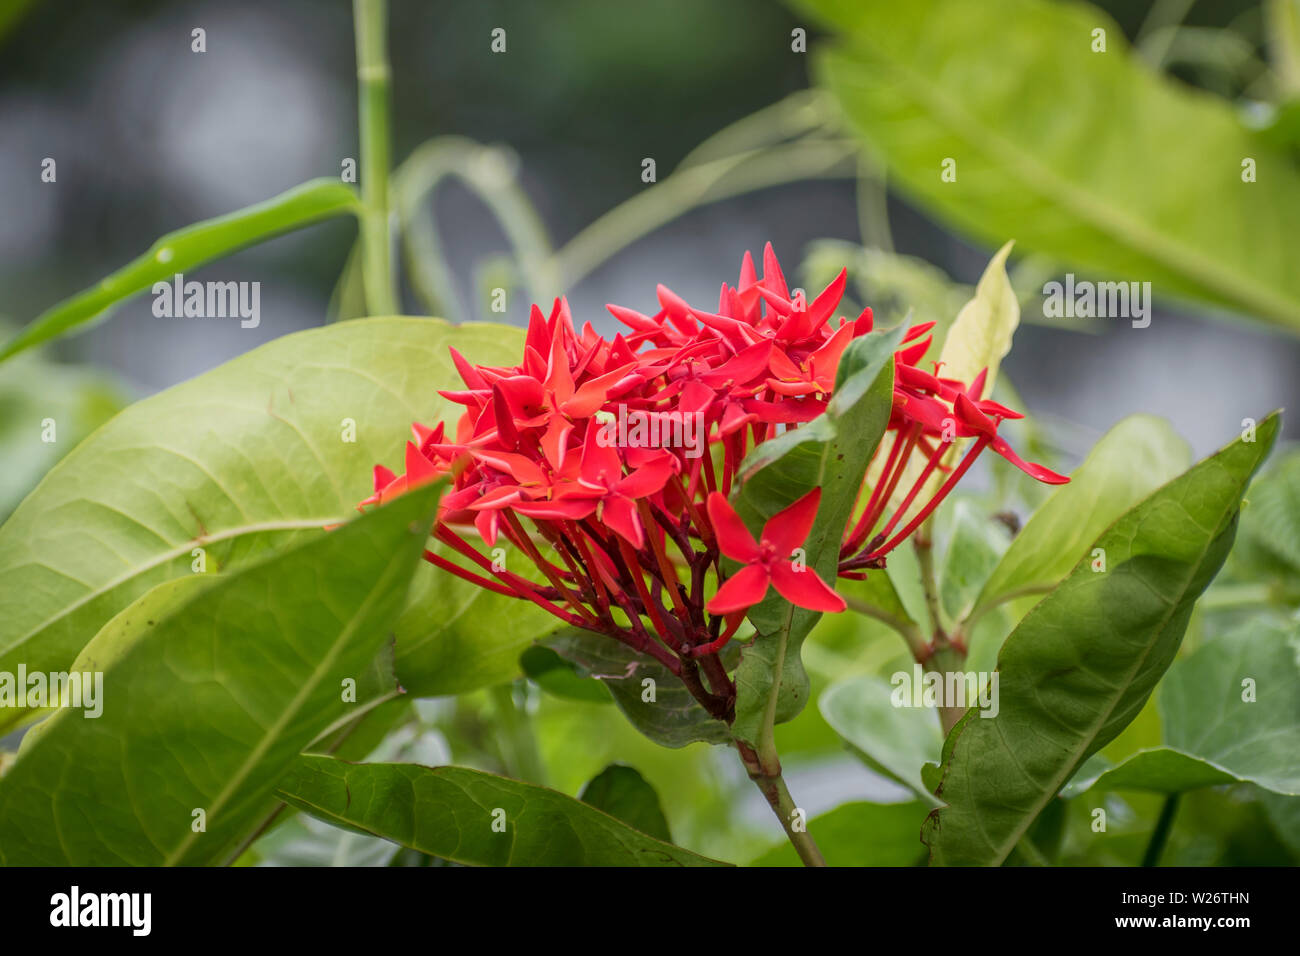 Rongon or Ixora coccinea is a species of flowering plant in the Rubiaceae family. It is a common flowering shrub native to Southern India, Bangladesh, Stock Photo